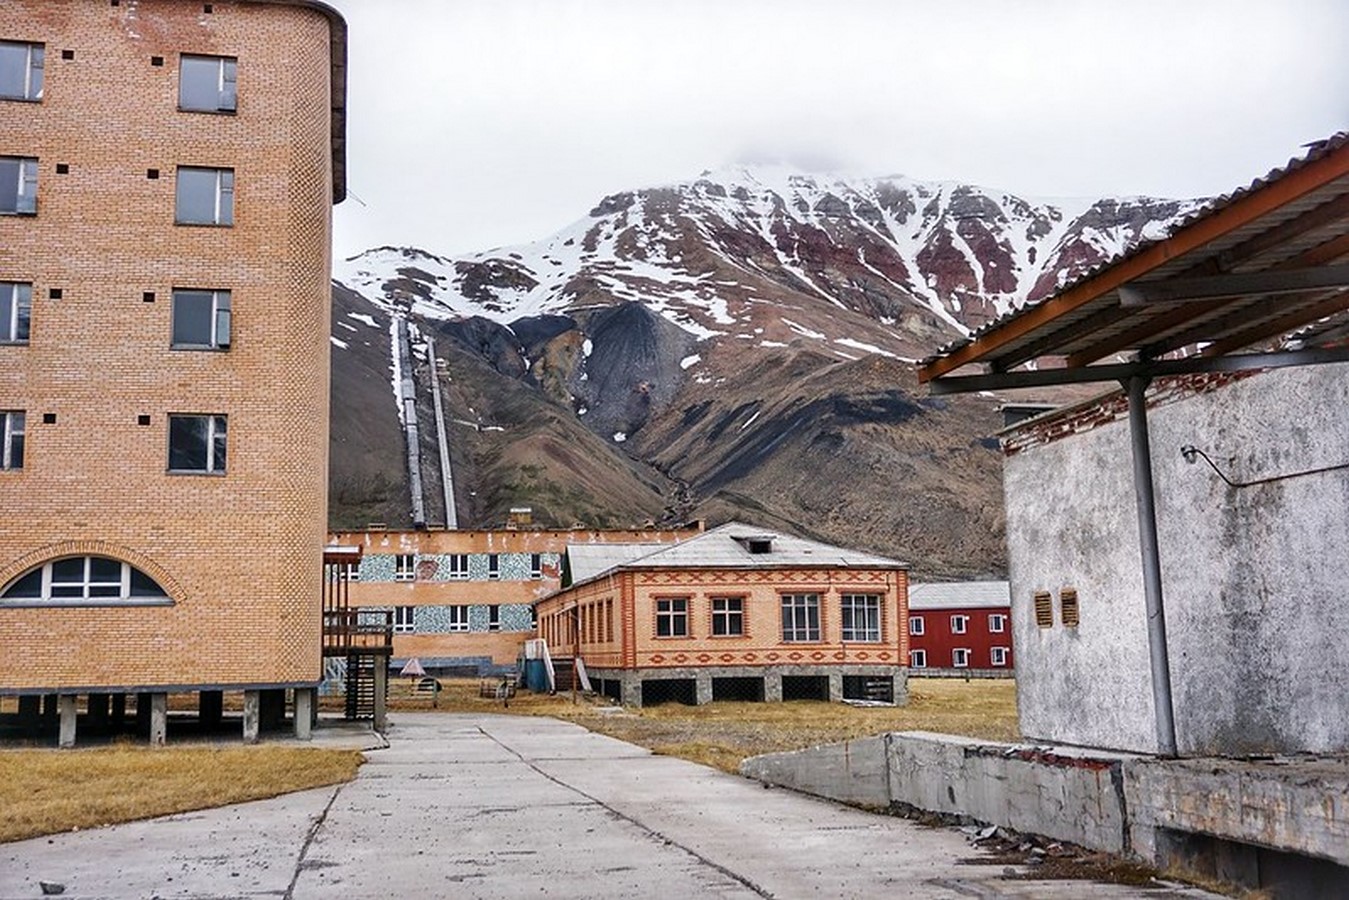 Lost In Time: Pyramiden, Norway - Sheet4